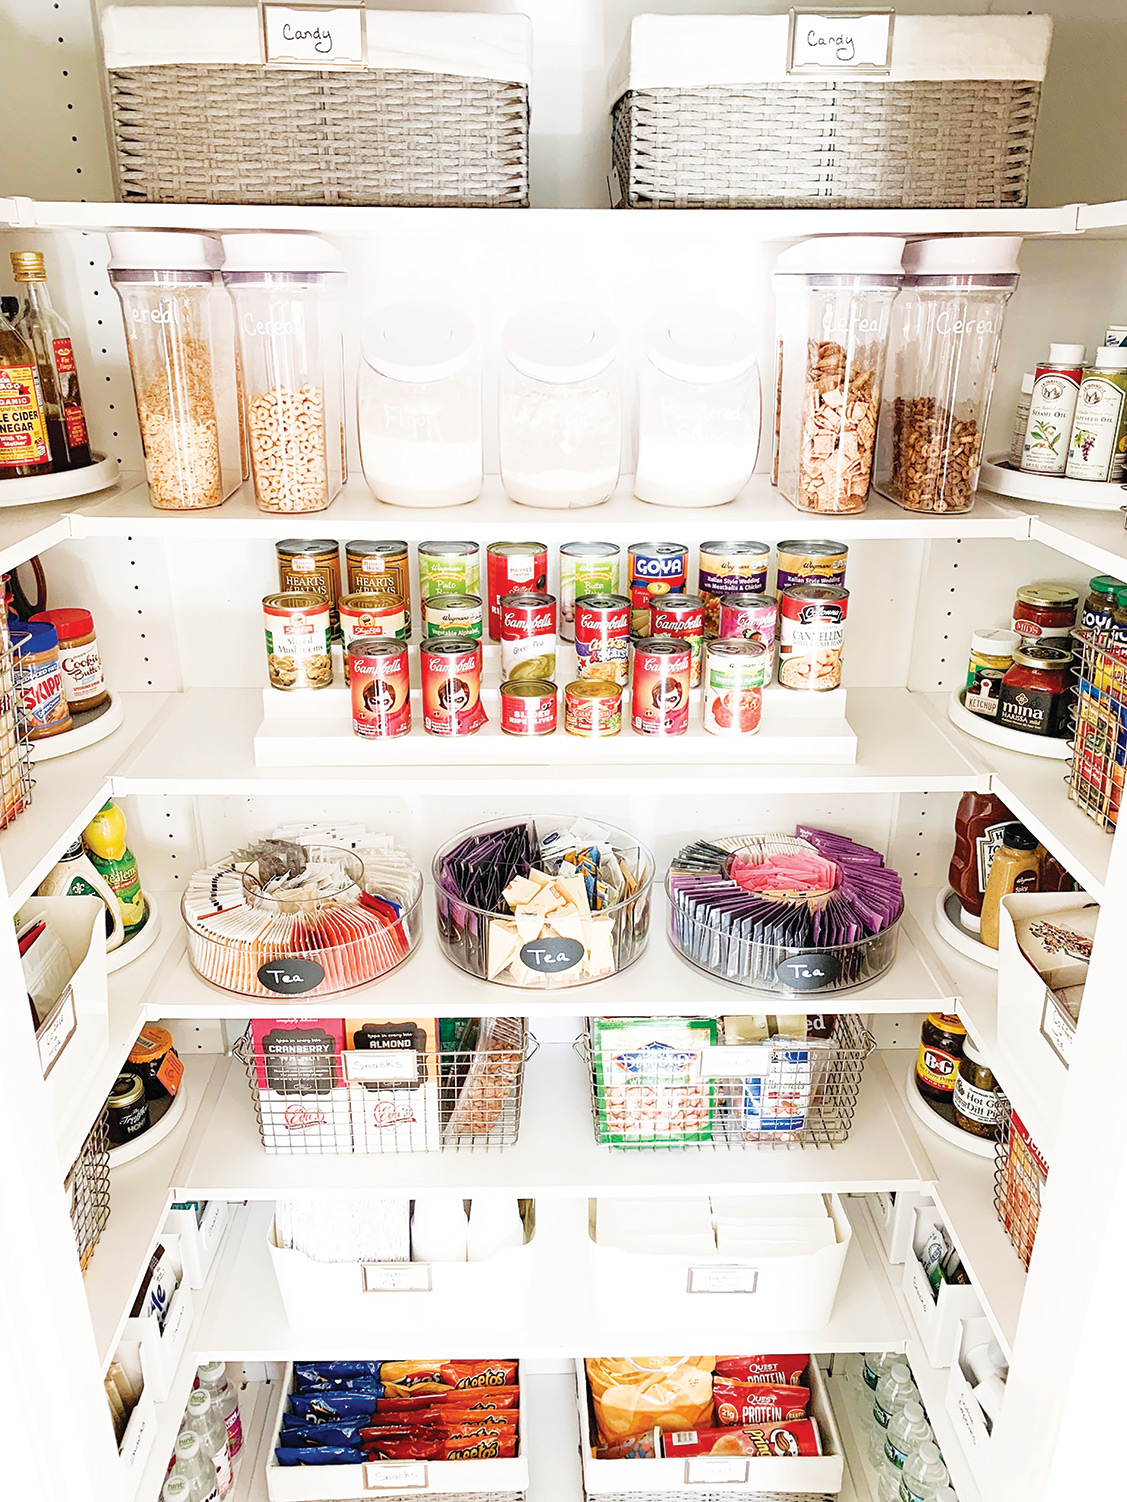 Should You Really Decant Every Pantry Item Into Storage Containers?